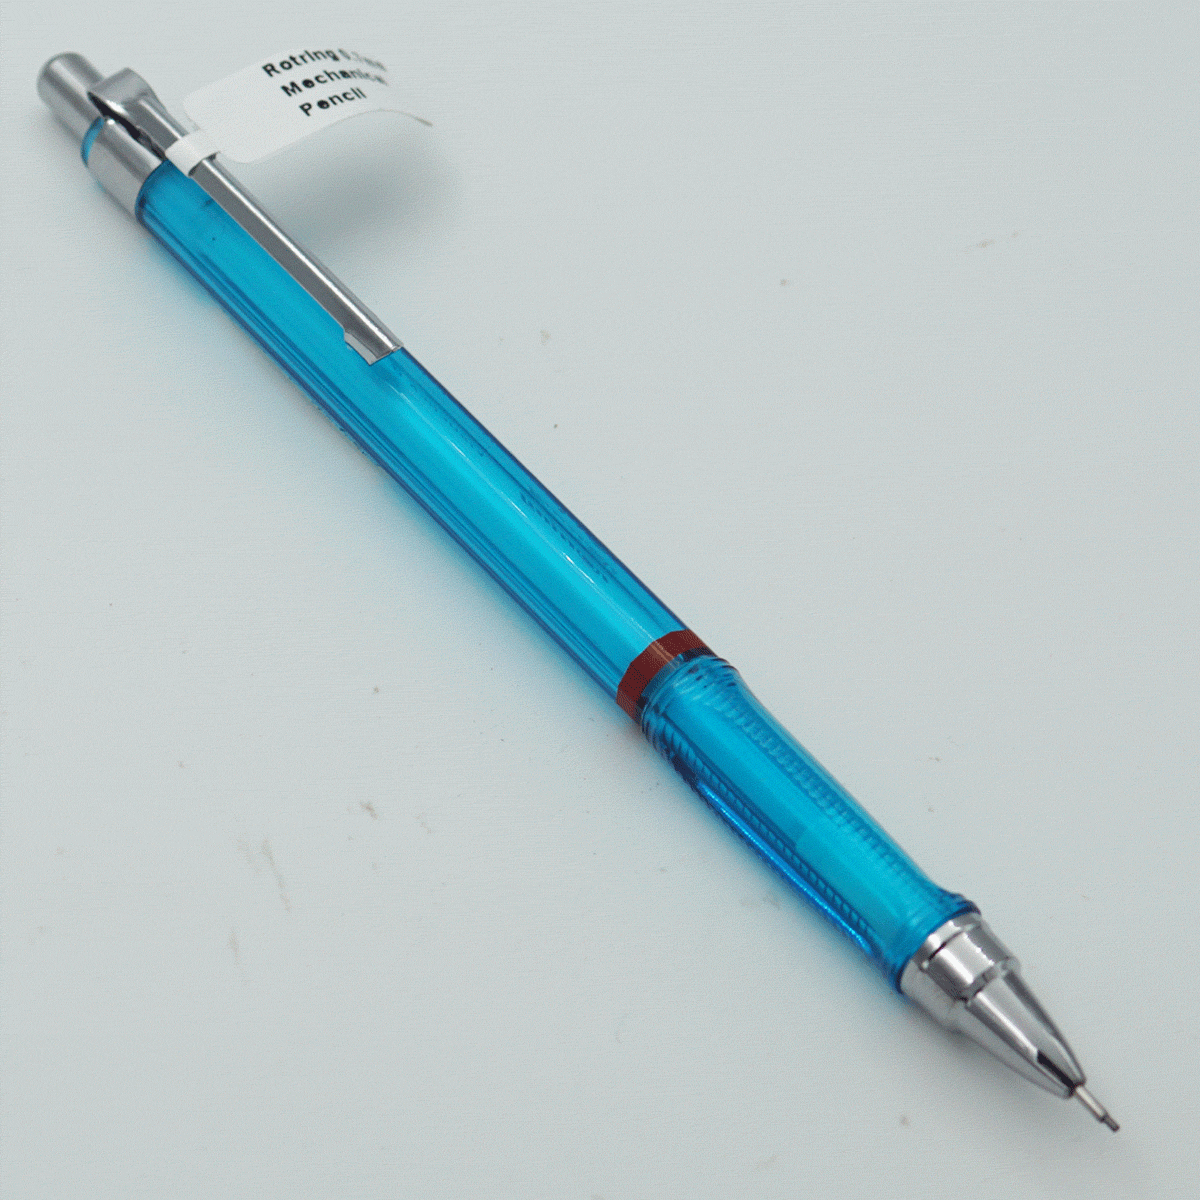 Rotring Visuclick 0.7mm Transparent Blue Color Body With Silver Clip Mechanical Pencil SKU 24404